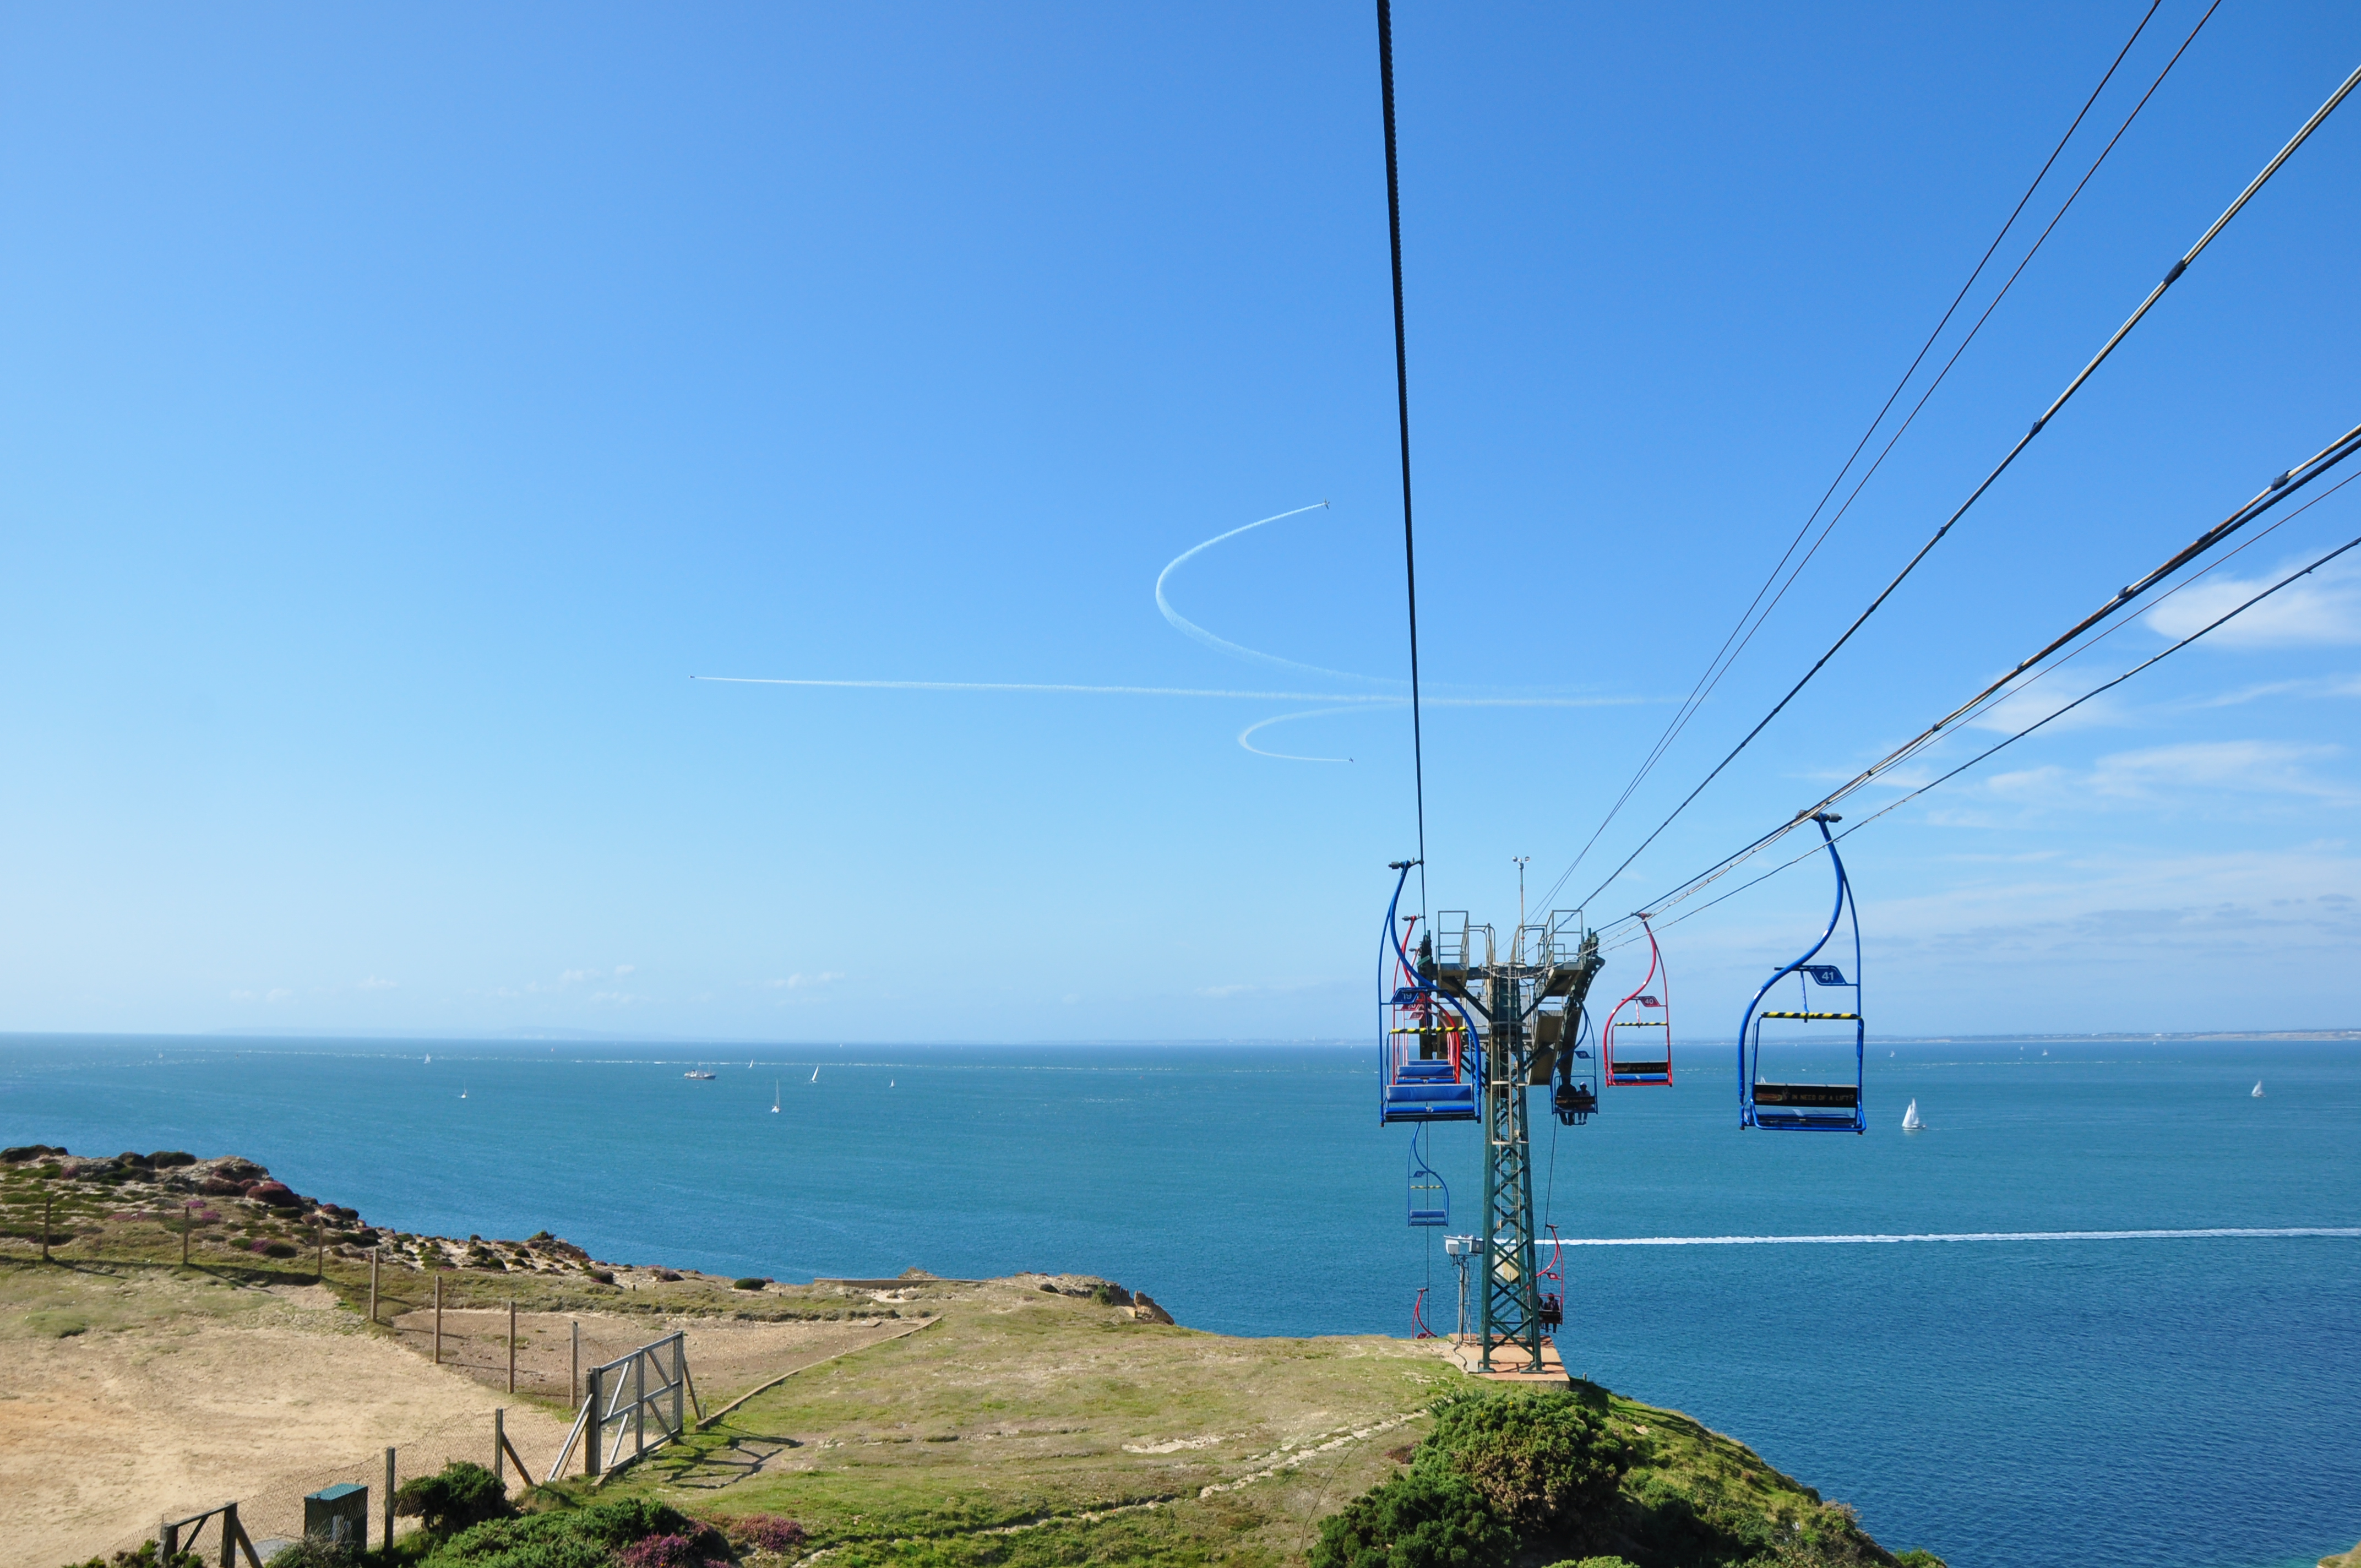 The NEedles Chairlift